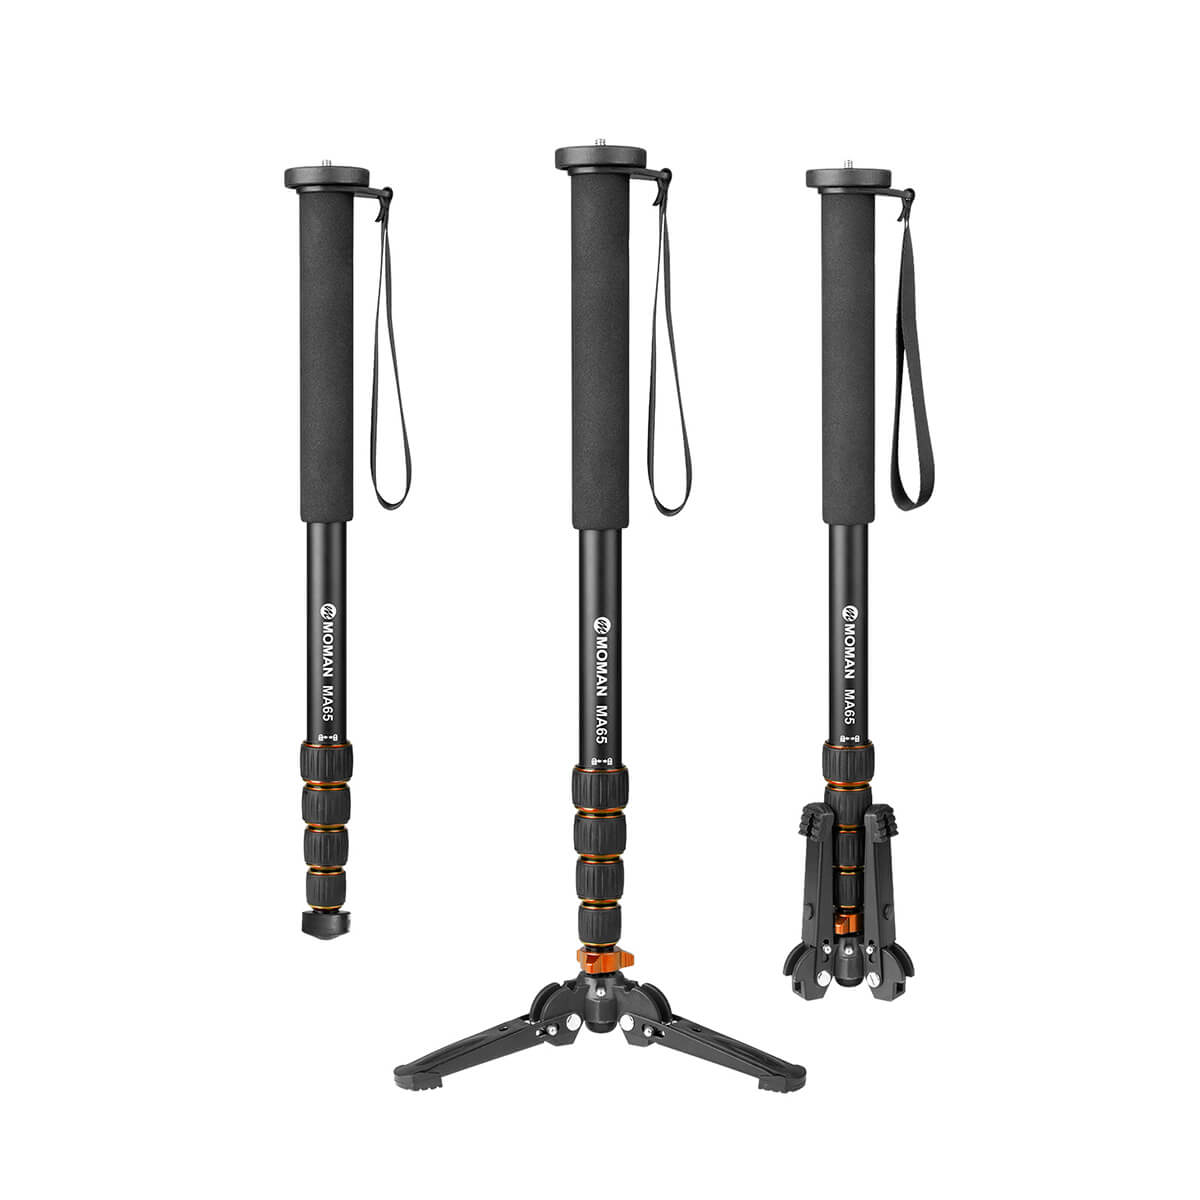 Moman MA65 Black Orange is made of sturdy aluminum alloy and has a compact body. You can take it for field shooting.